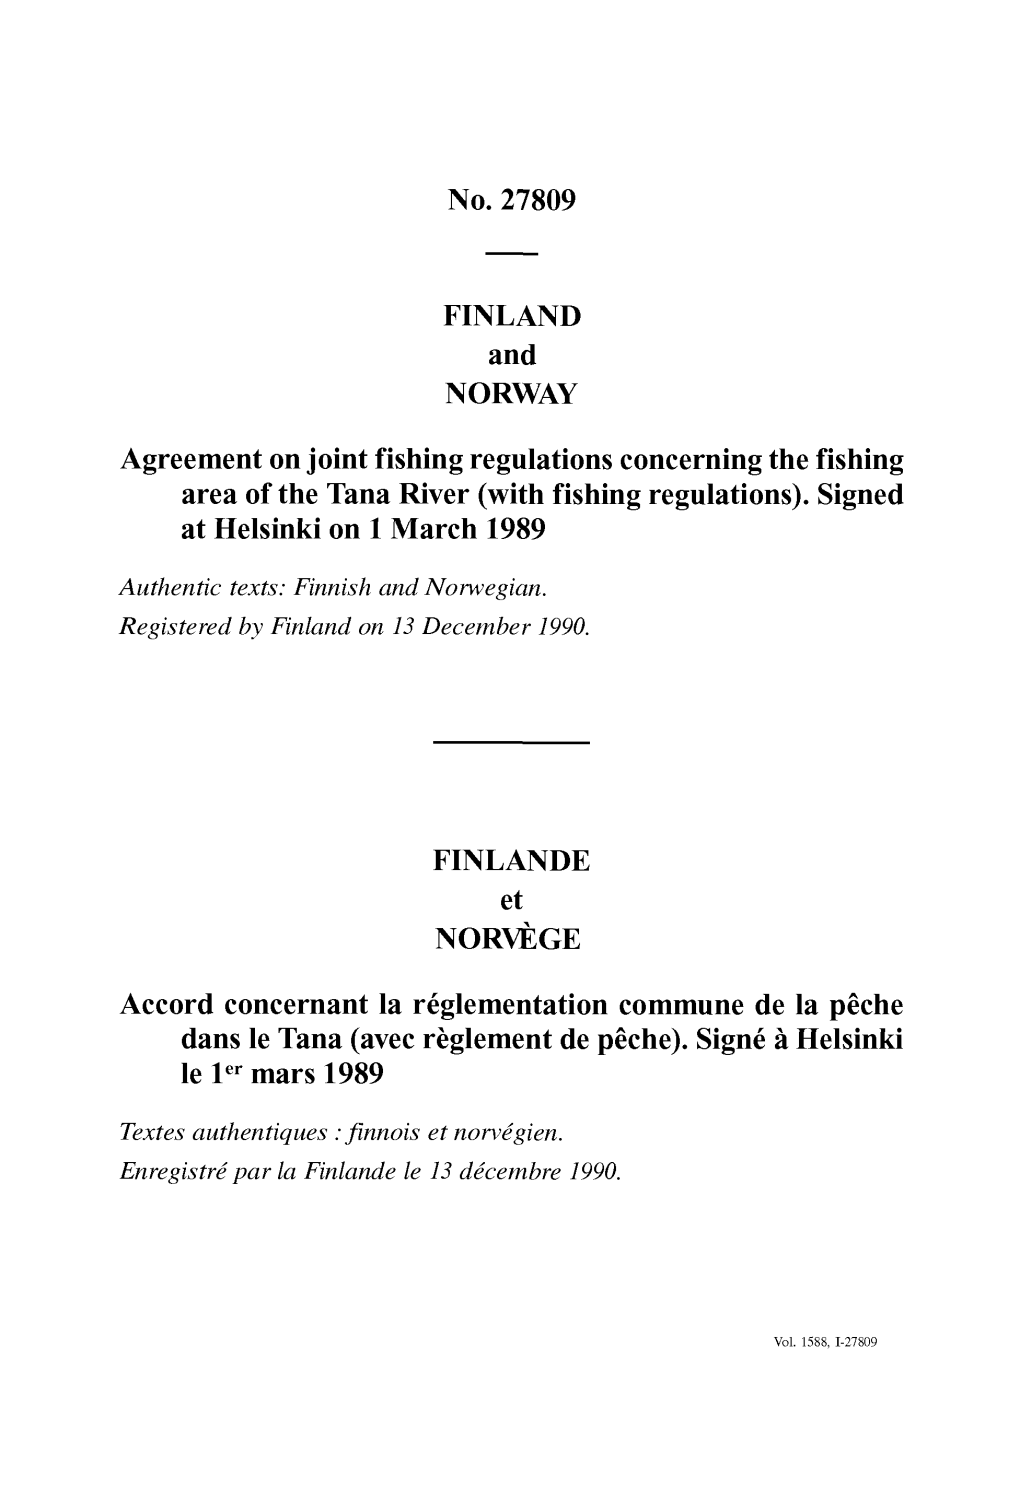 No. 27809 FINLAND and NORWAY Agreement on Joint Fishing